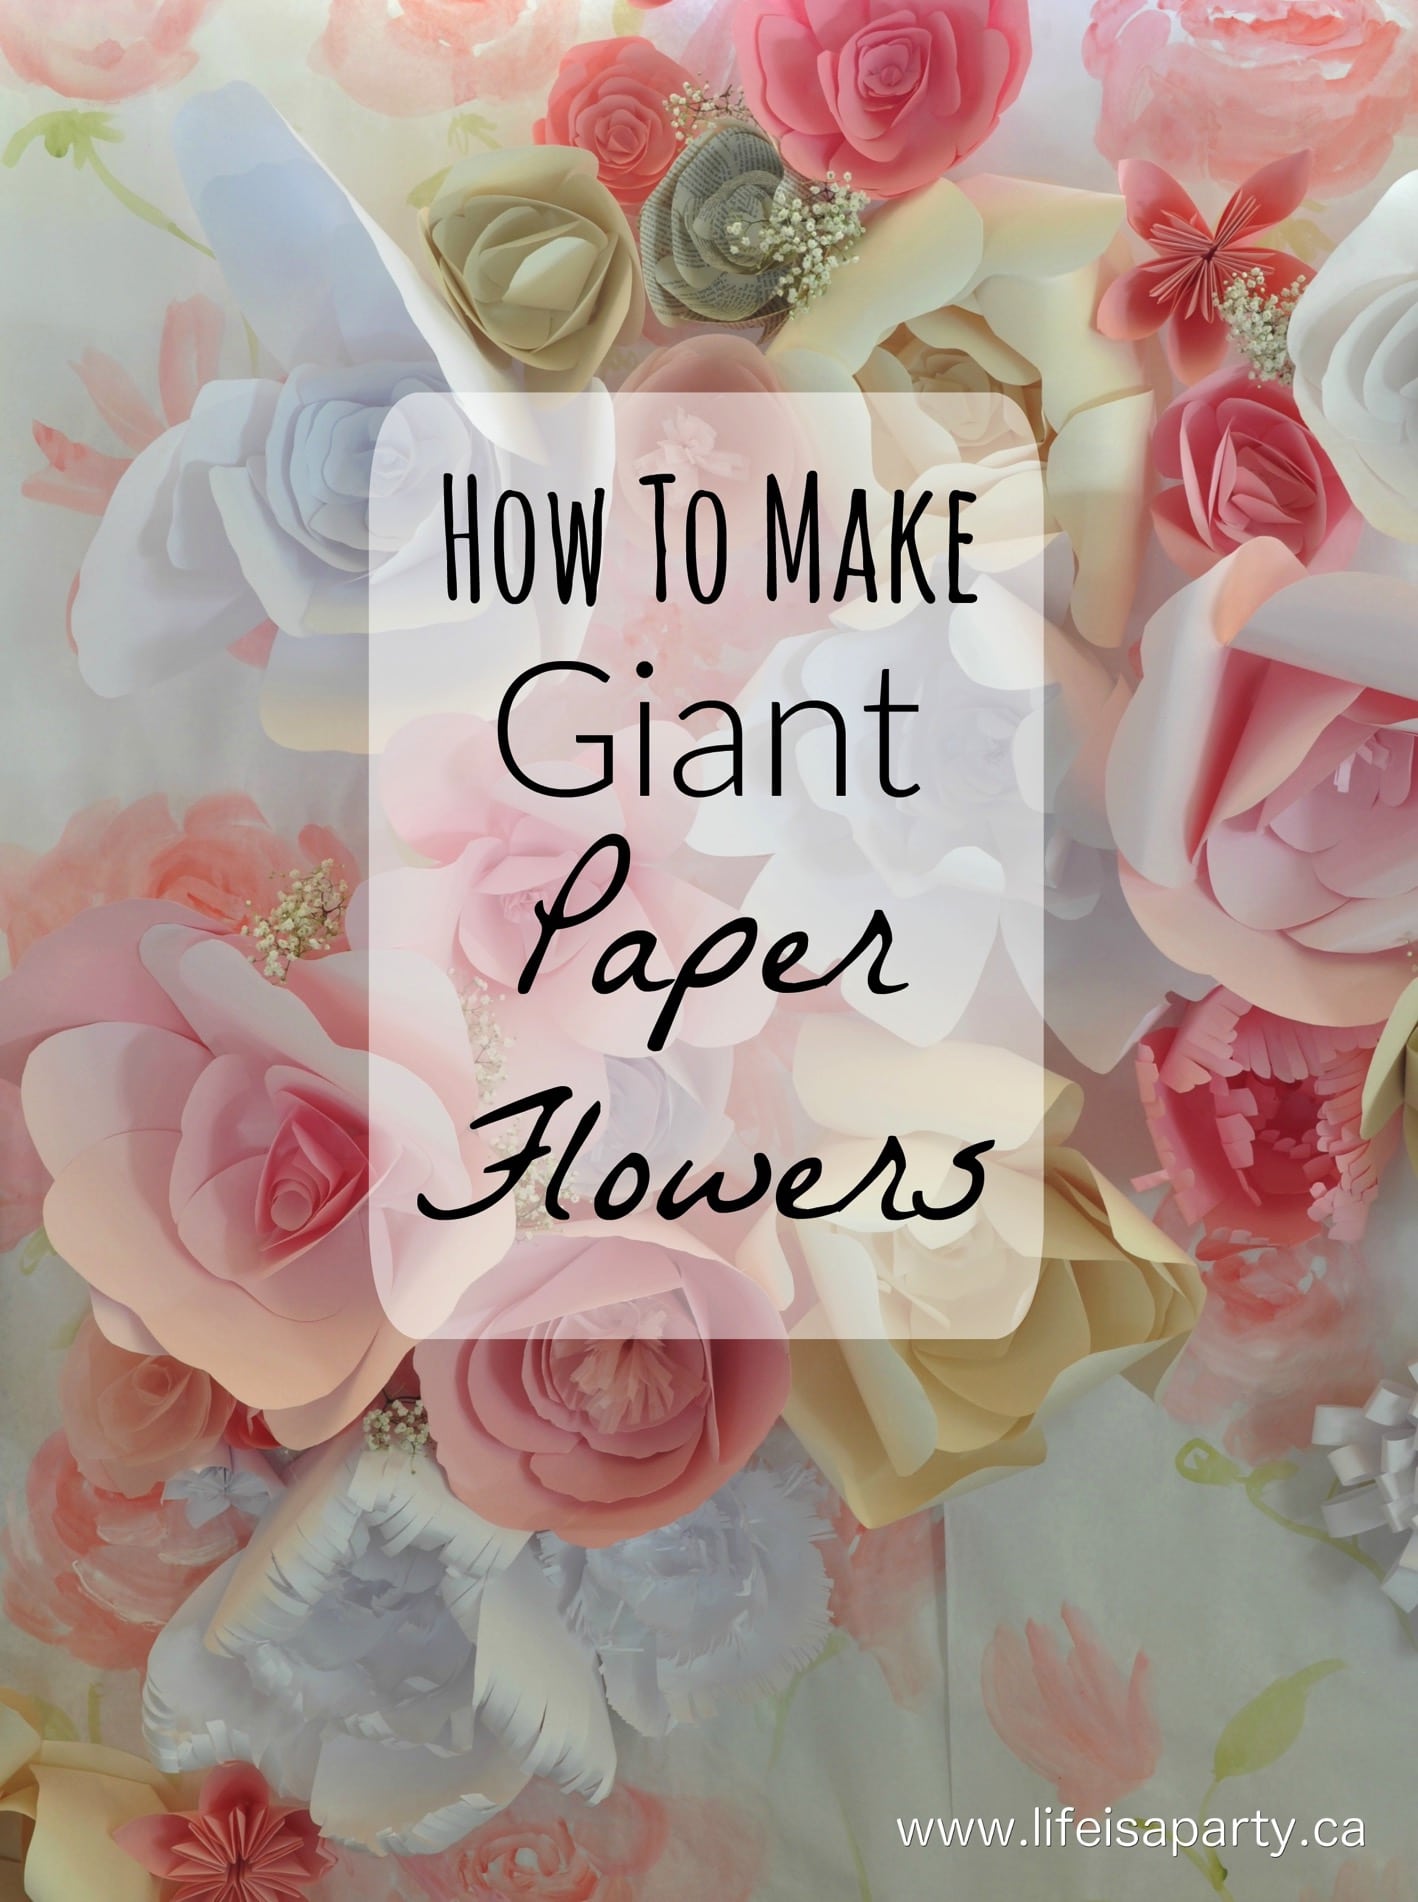 How To Make Giant Paper Flowers: see how to turn regular paper into beautiful and inexpensive flowers, from large to small in a video tutorial. This diy is perfect for a wedding, shower, or home decor.